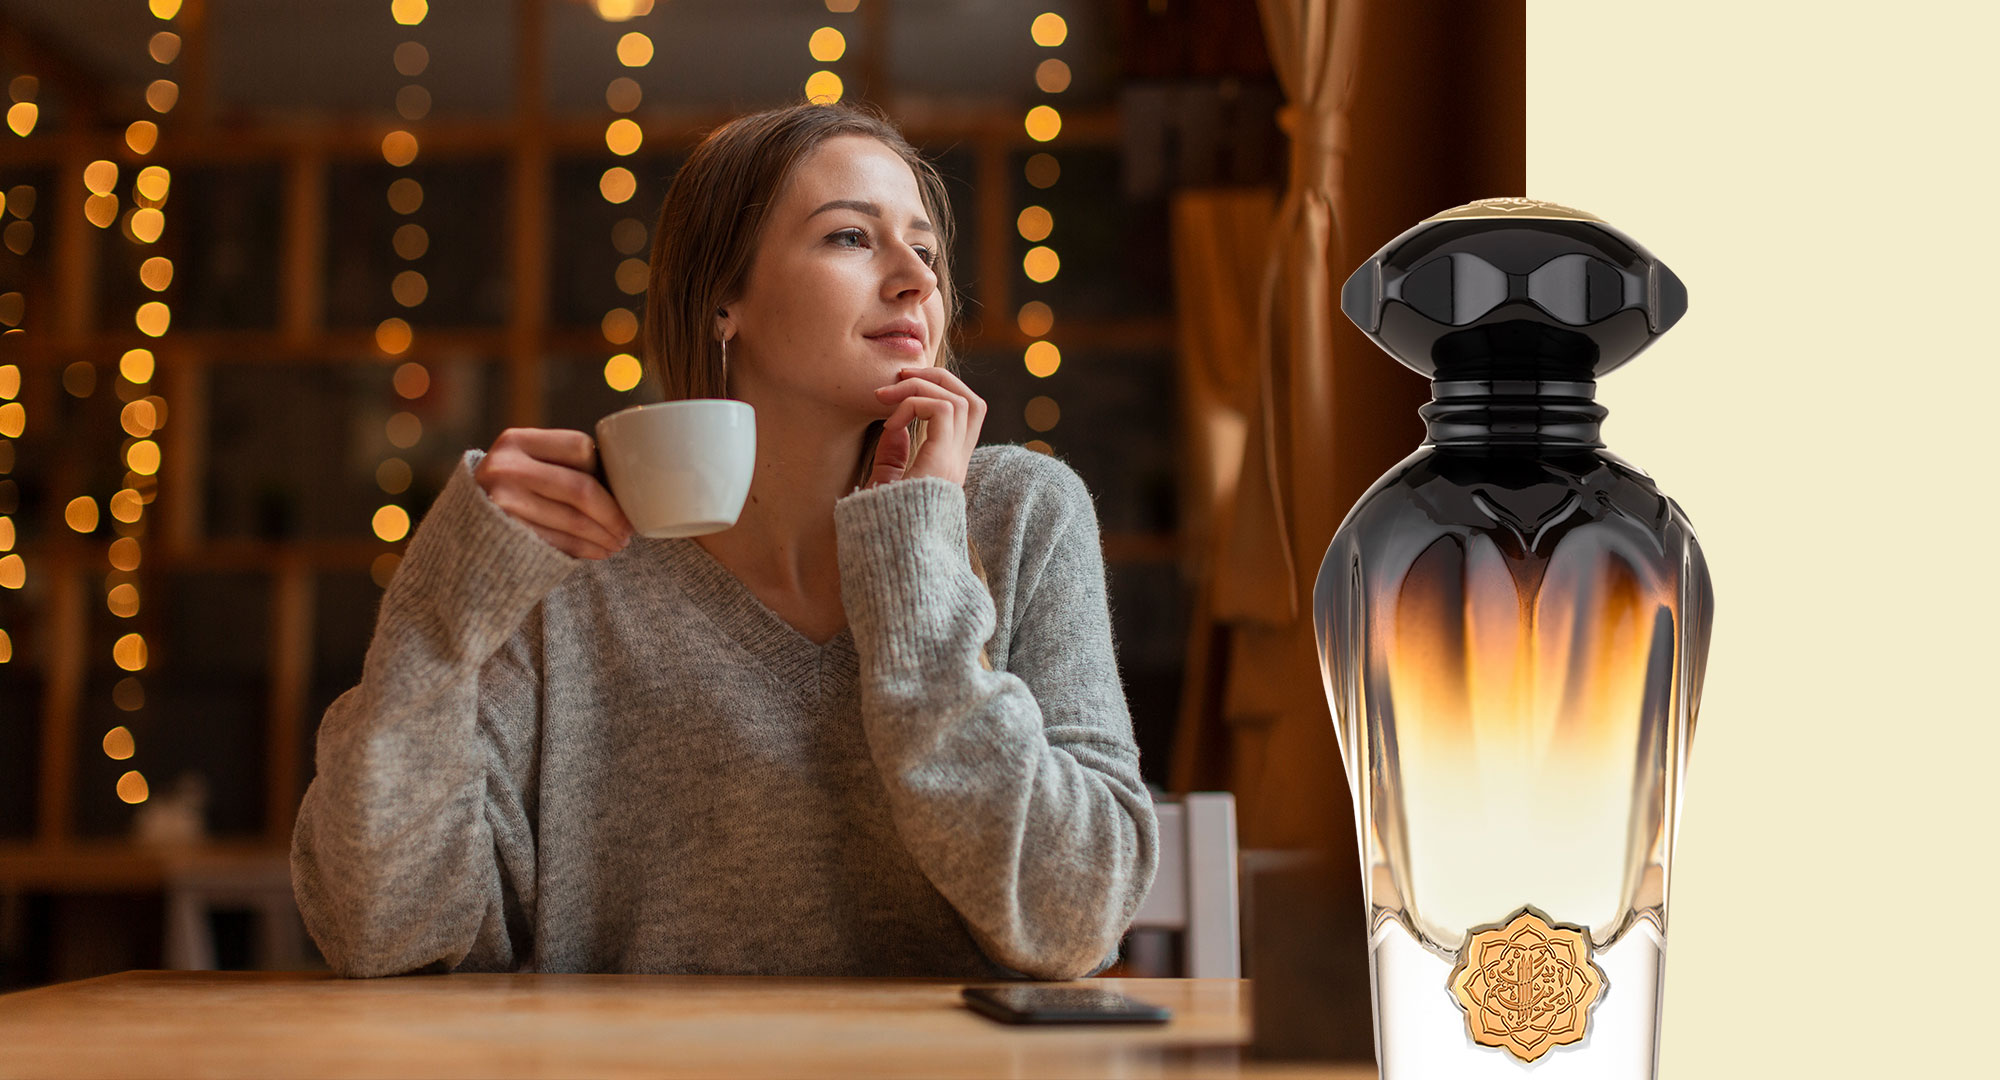 Invigorate Your Mornings: Start the Day with the Energizing Aroma of Spicy Perfumes